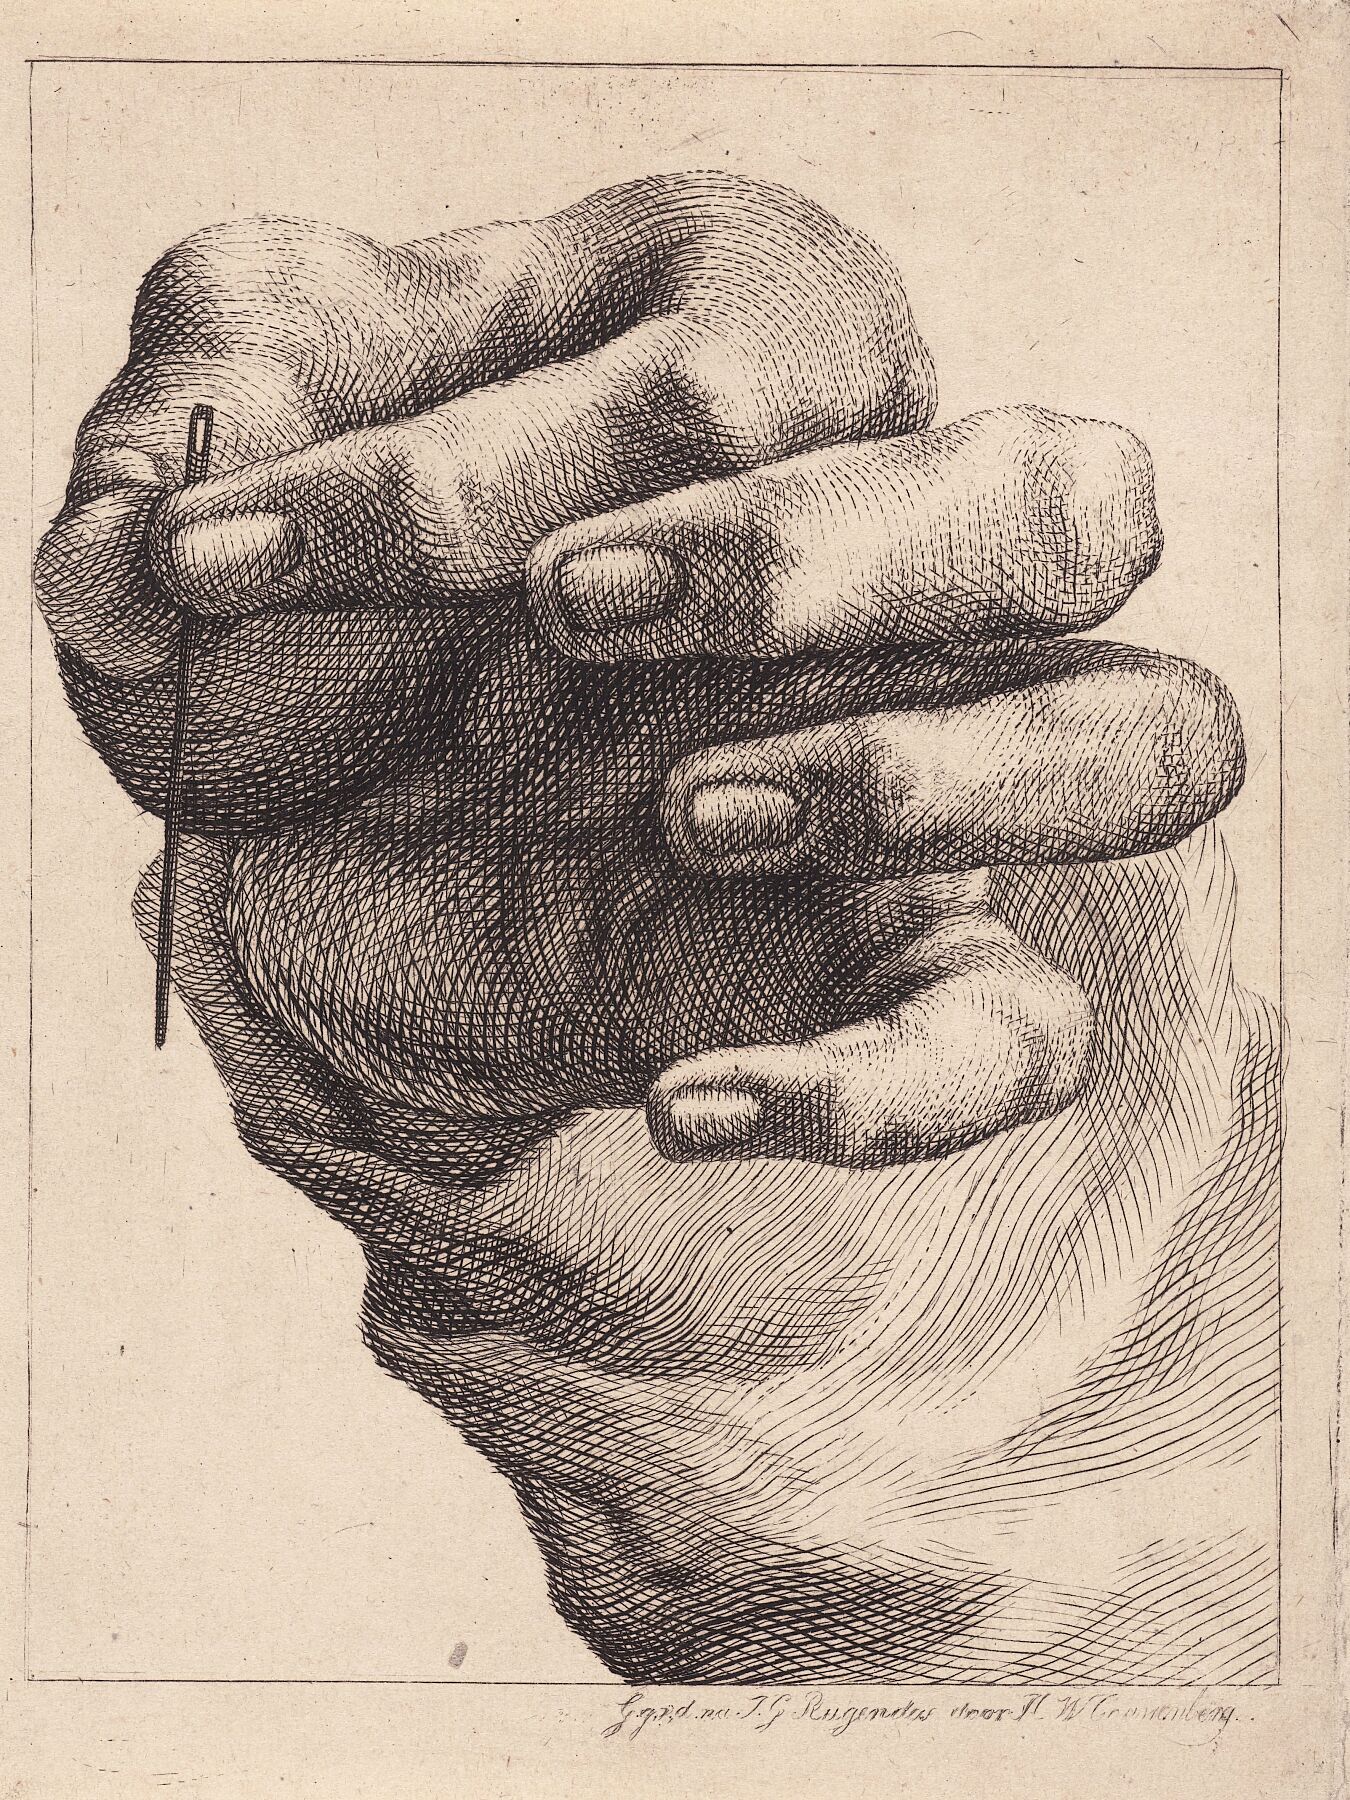 Study of a hand with a needle between thumb and index finger, Henricus Wilhelmus Couwenberg, after Jeremias Gottlob Rugendas, 1830 - 1845